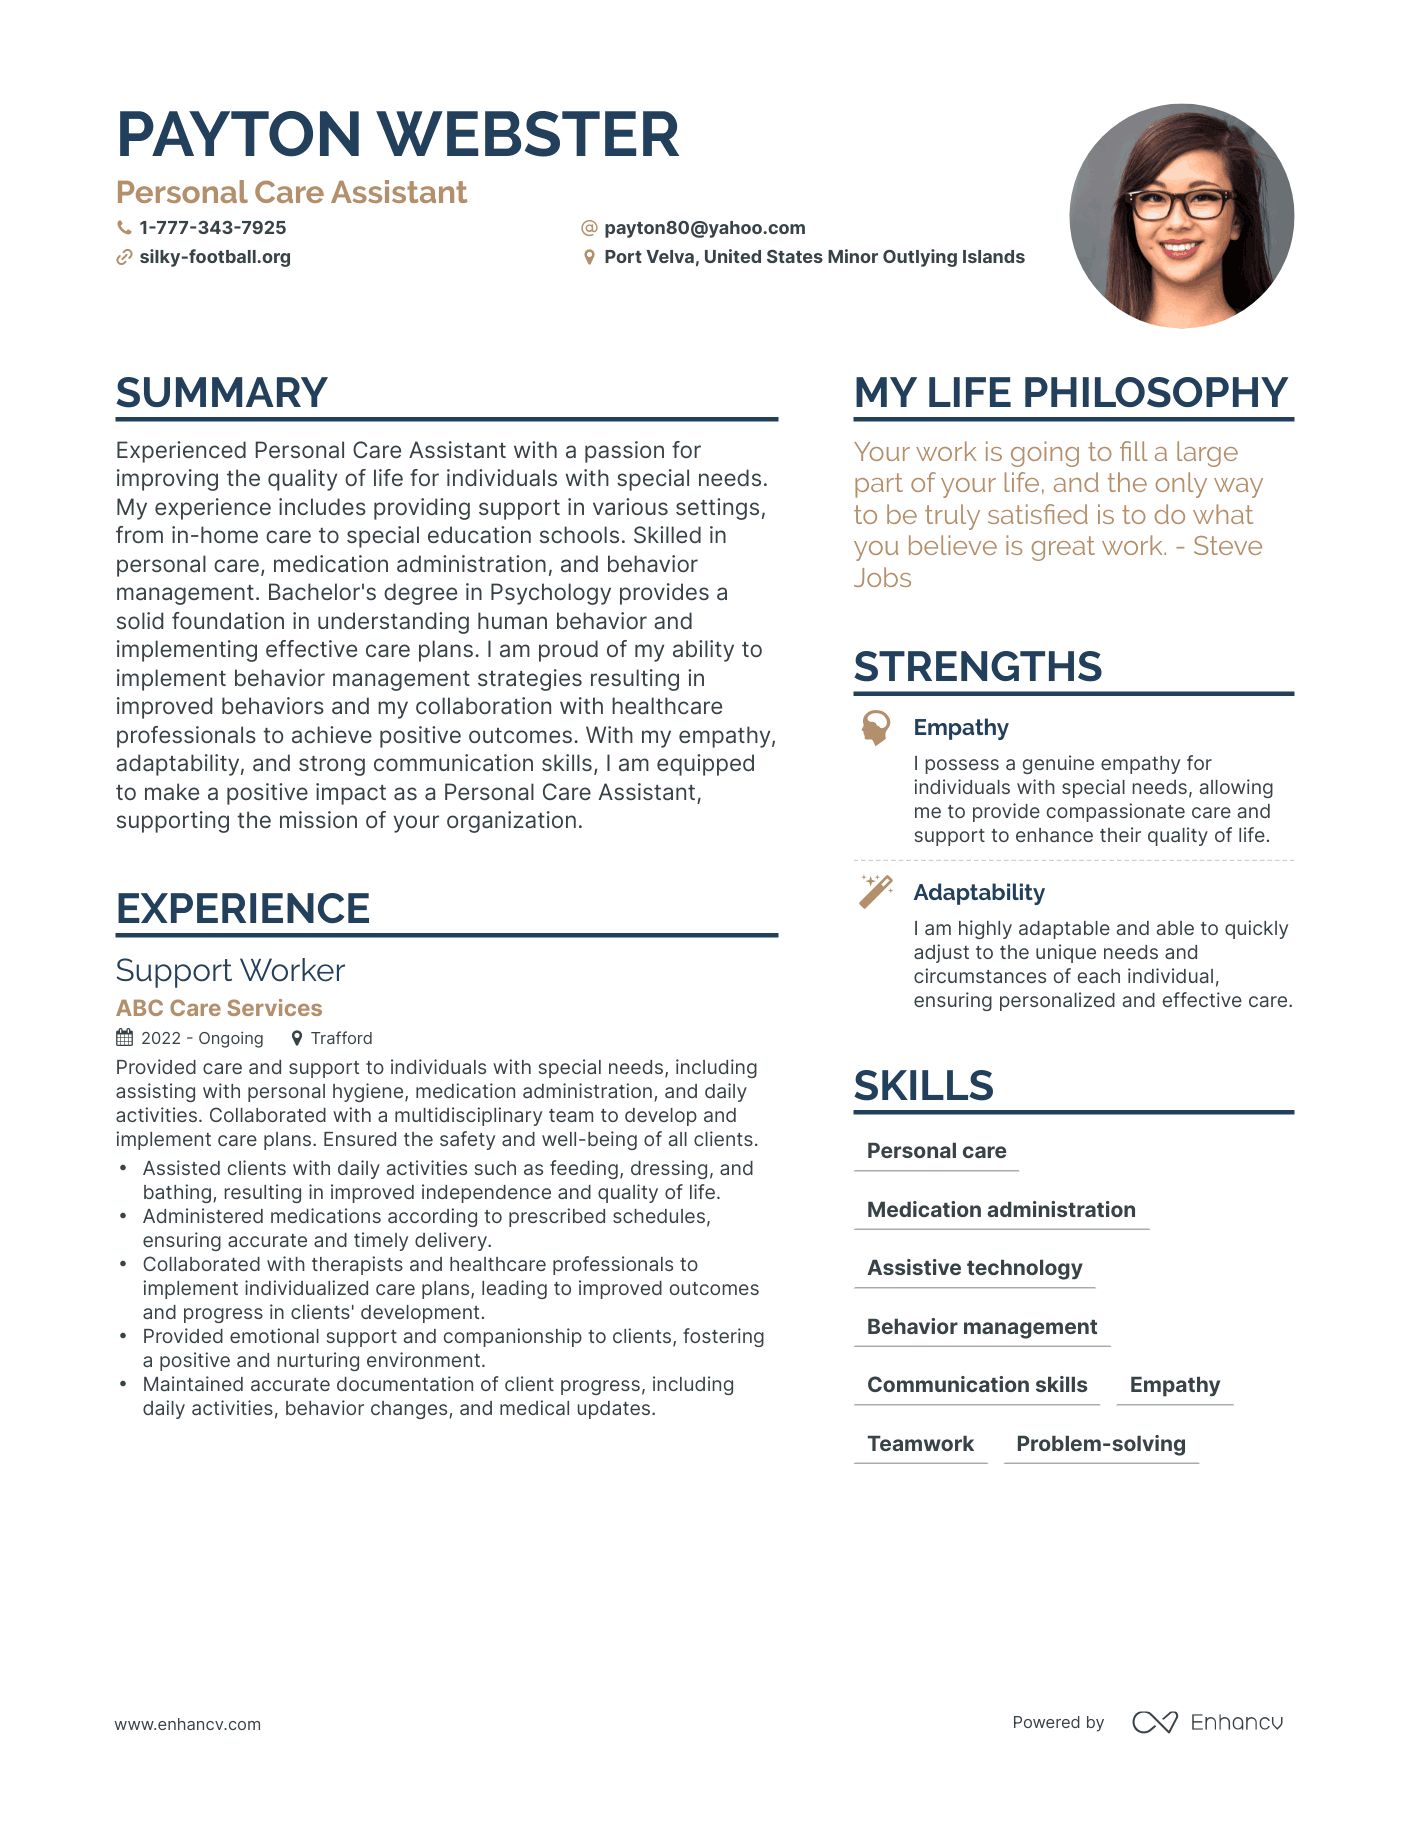 Personal Care Assistant resume example